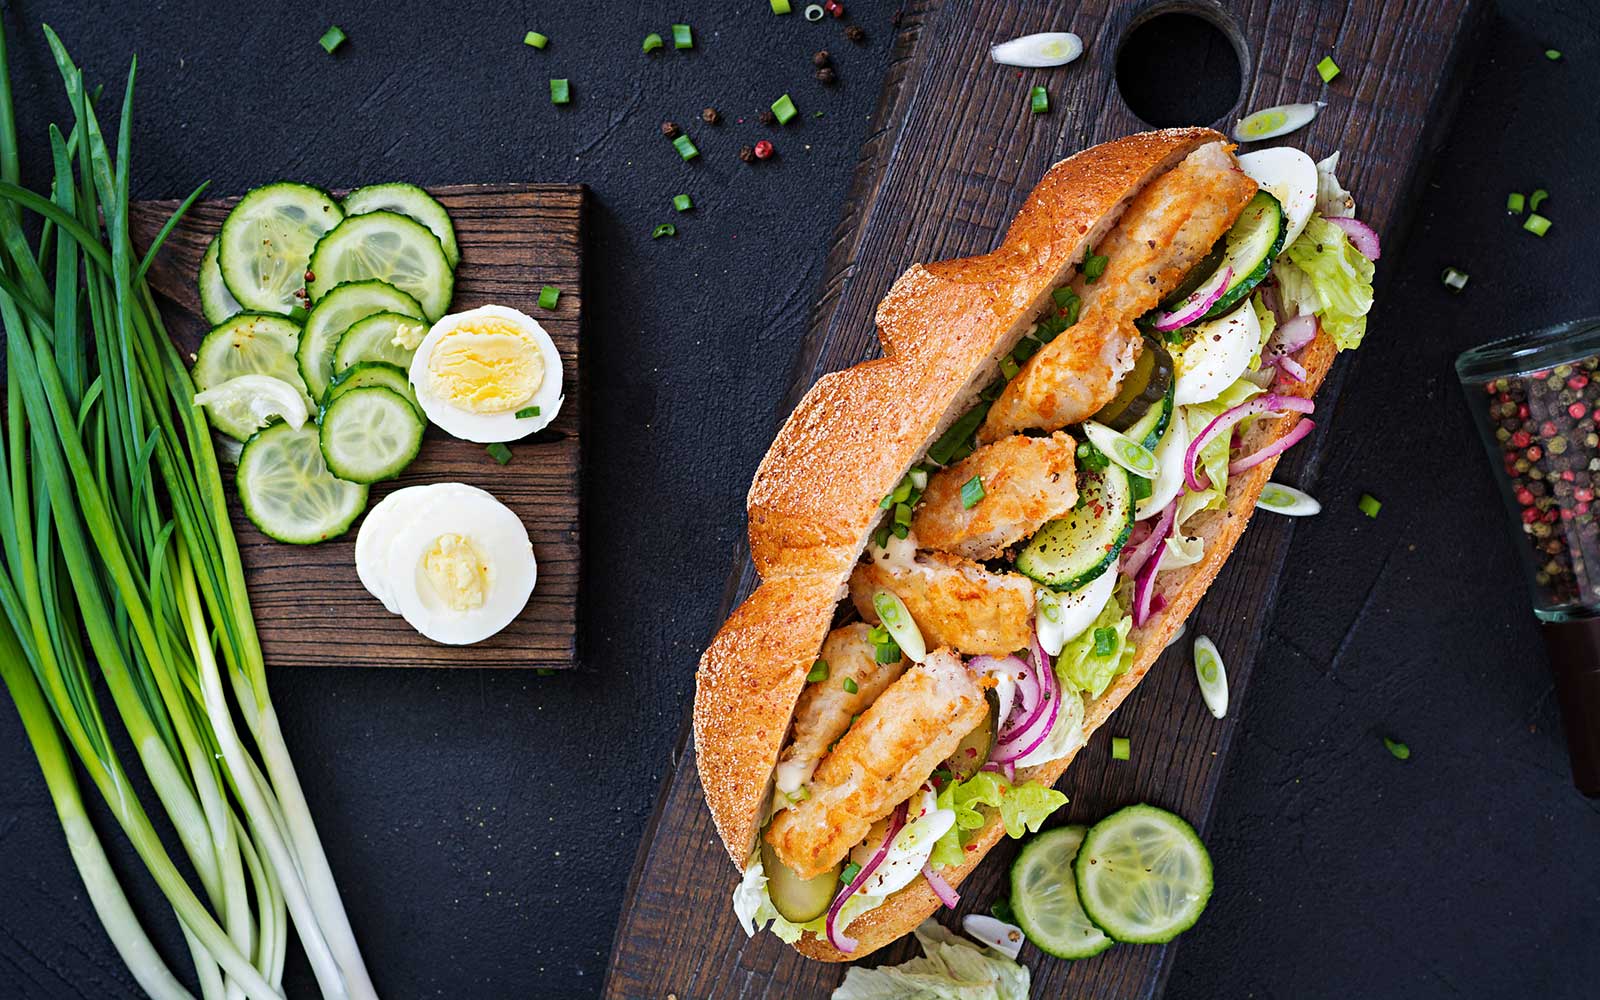 Fancy sandwiches for a different (and gluttonous) lunch break